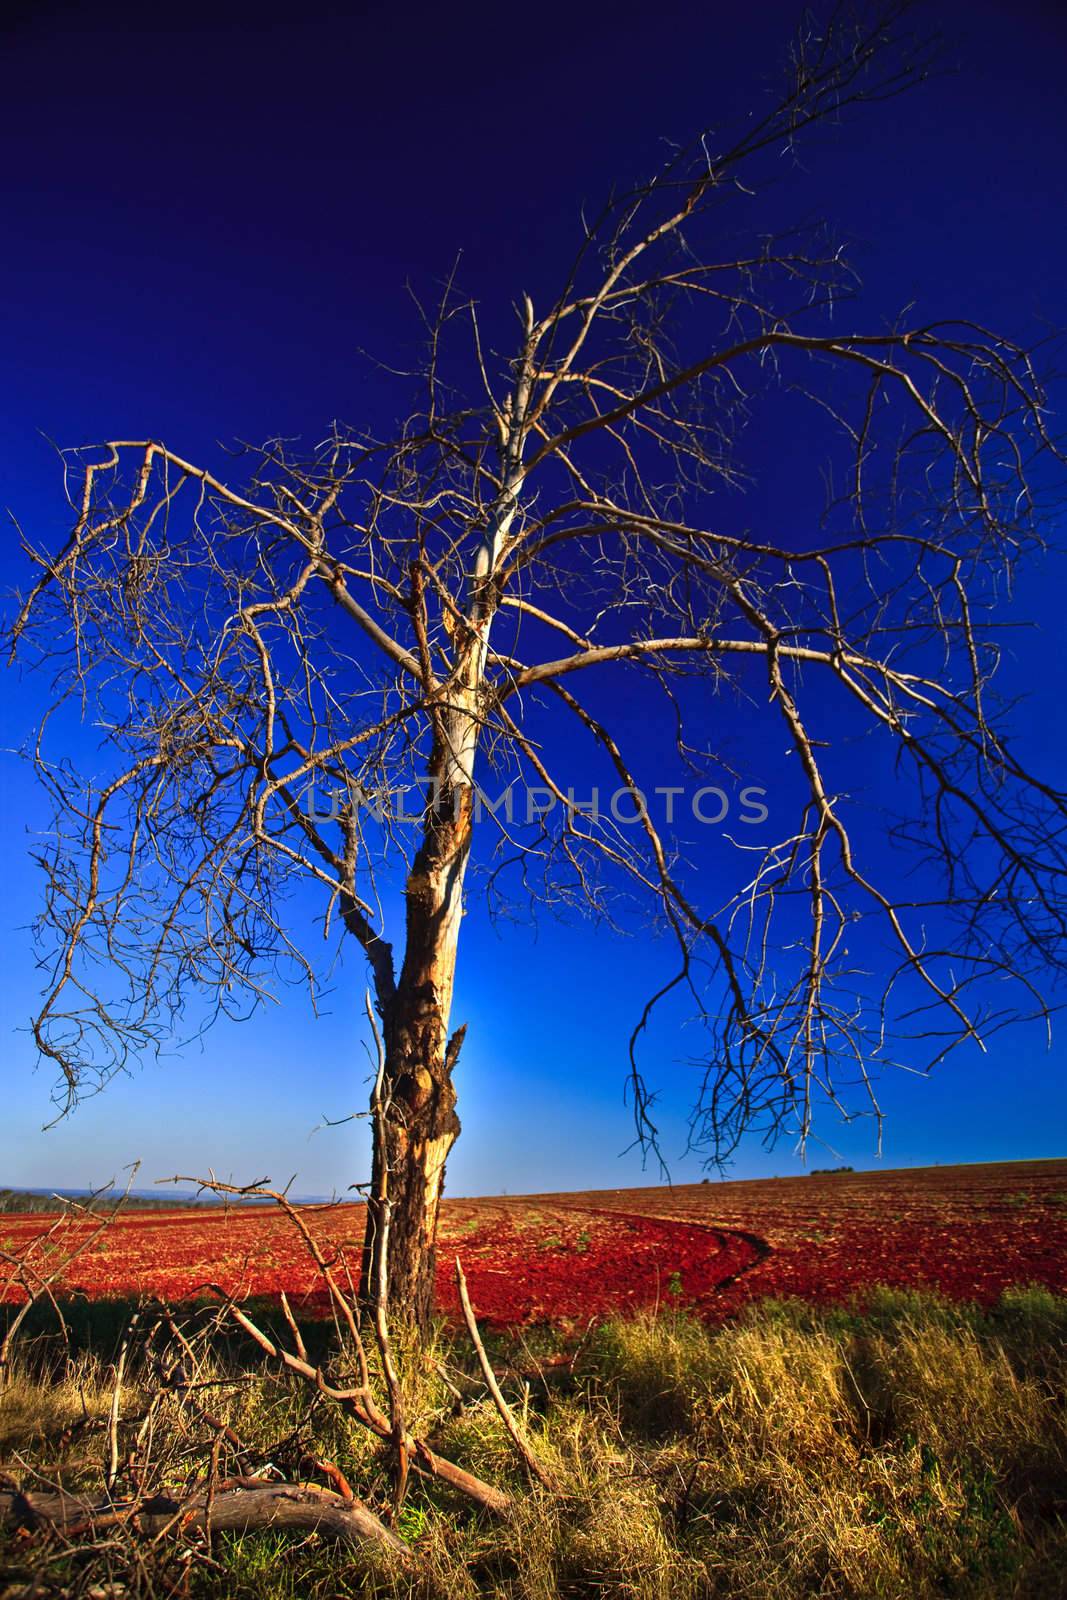 Wilting Tree in the middle of a feild